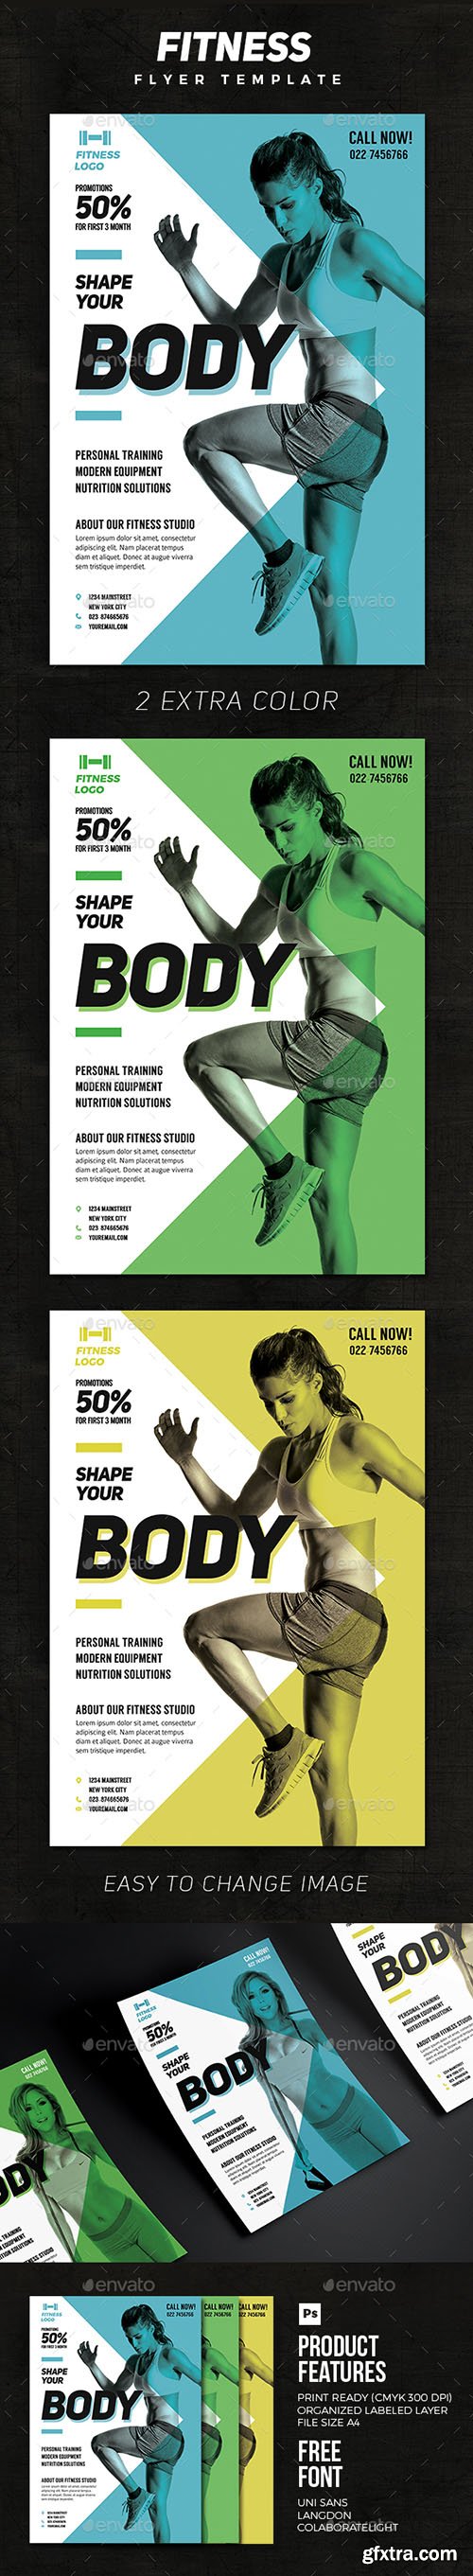 Graphicriver Fitness Template 17705207